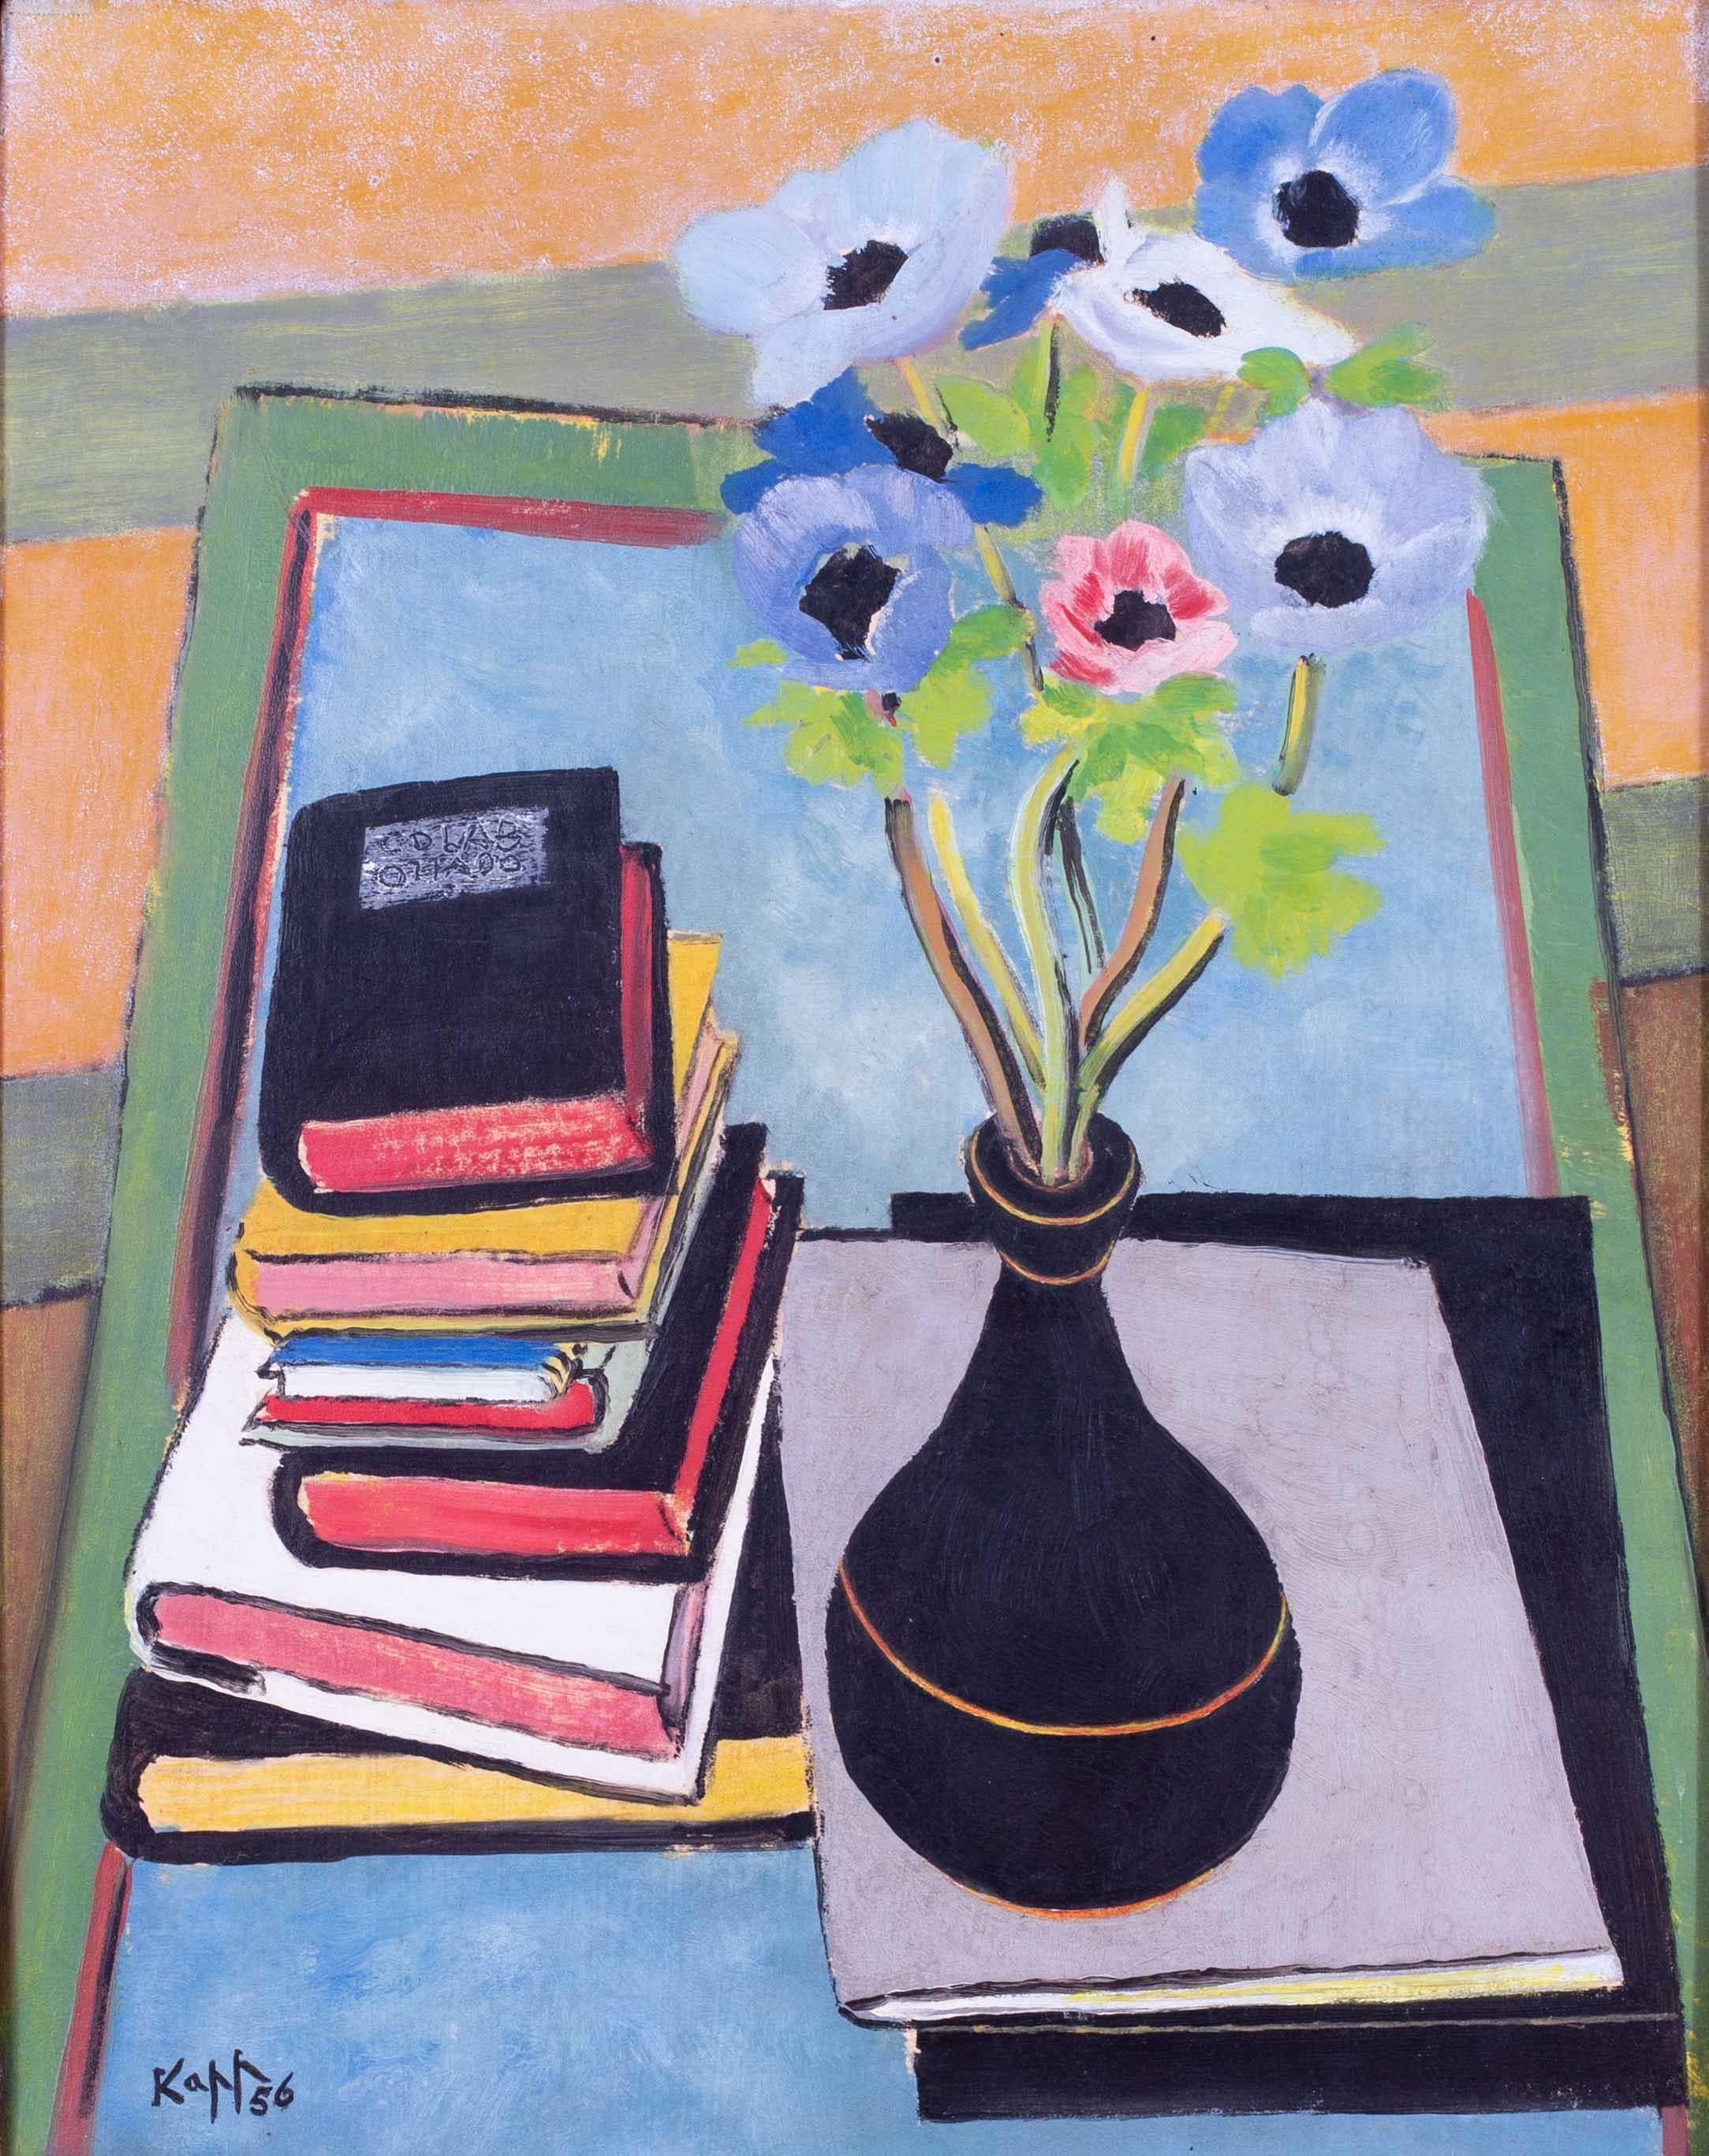 Mid Century Modern British still life of flowers and stacked books by Kapp, 1956 - Painting by Edmond Xavier Kapp